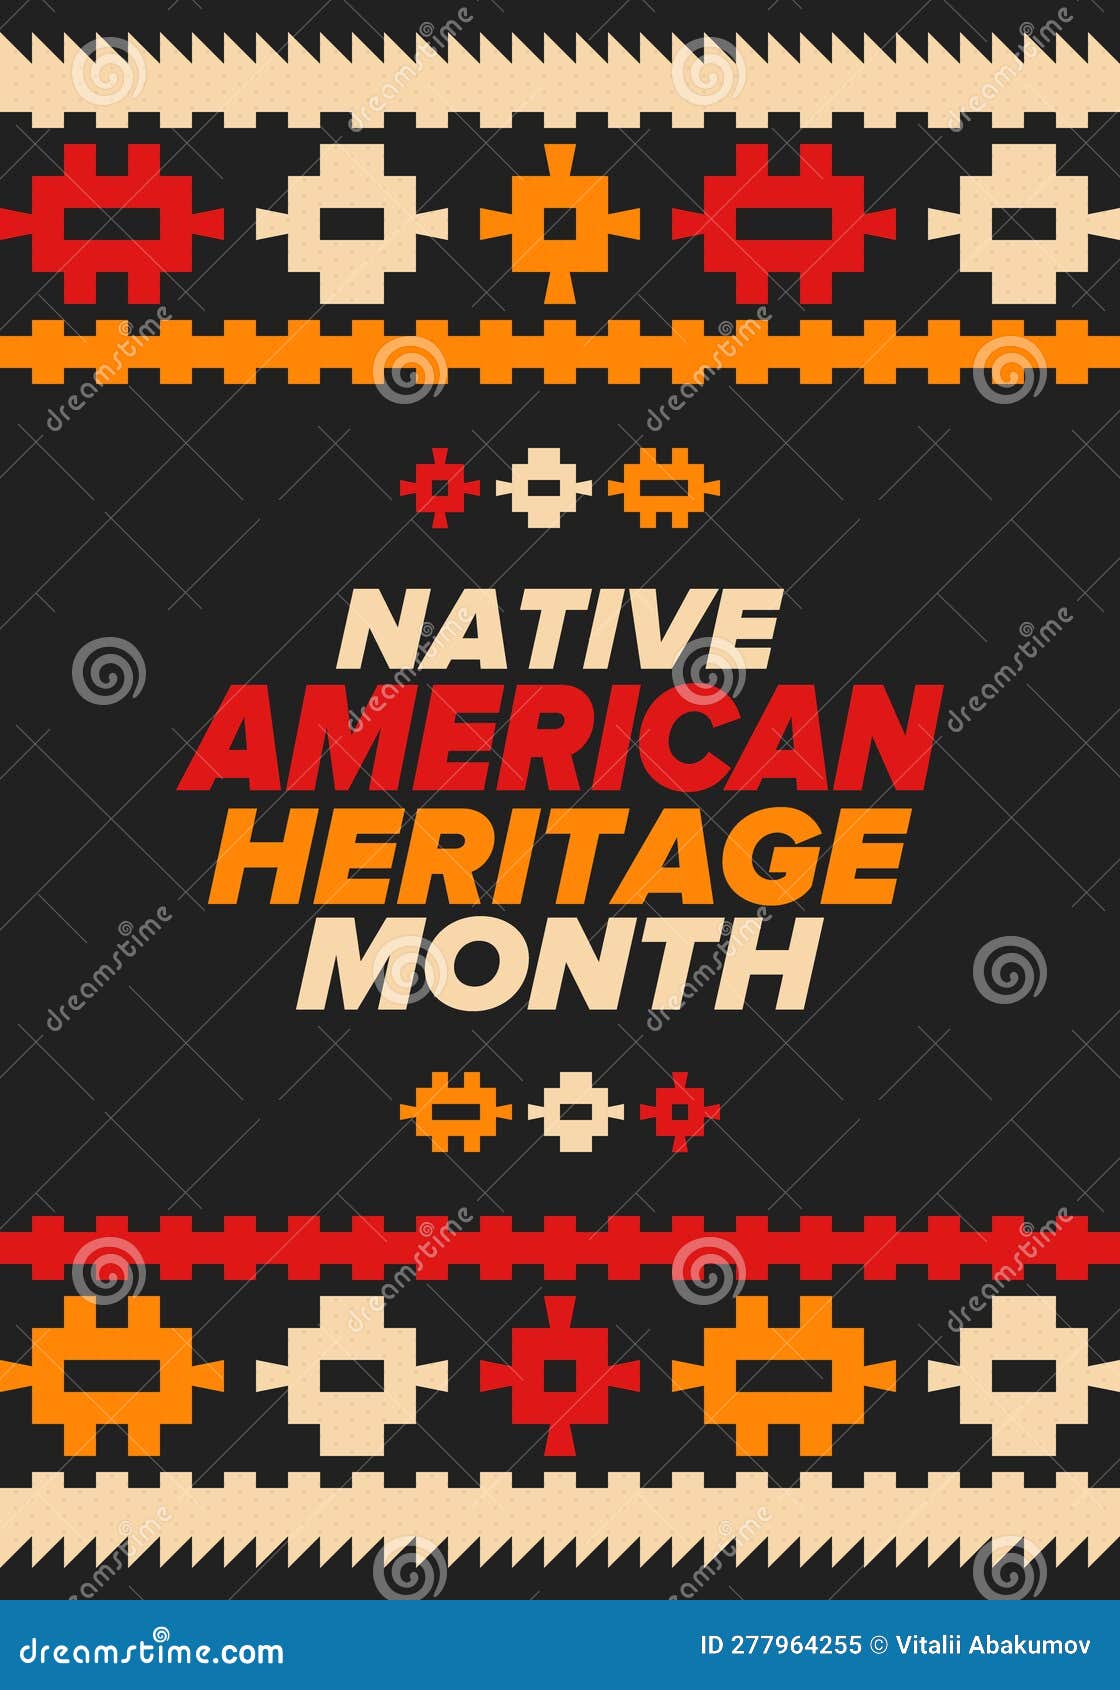 New poster celebrates Native American Heritage Month